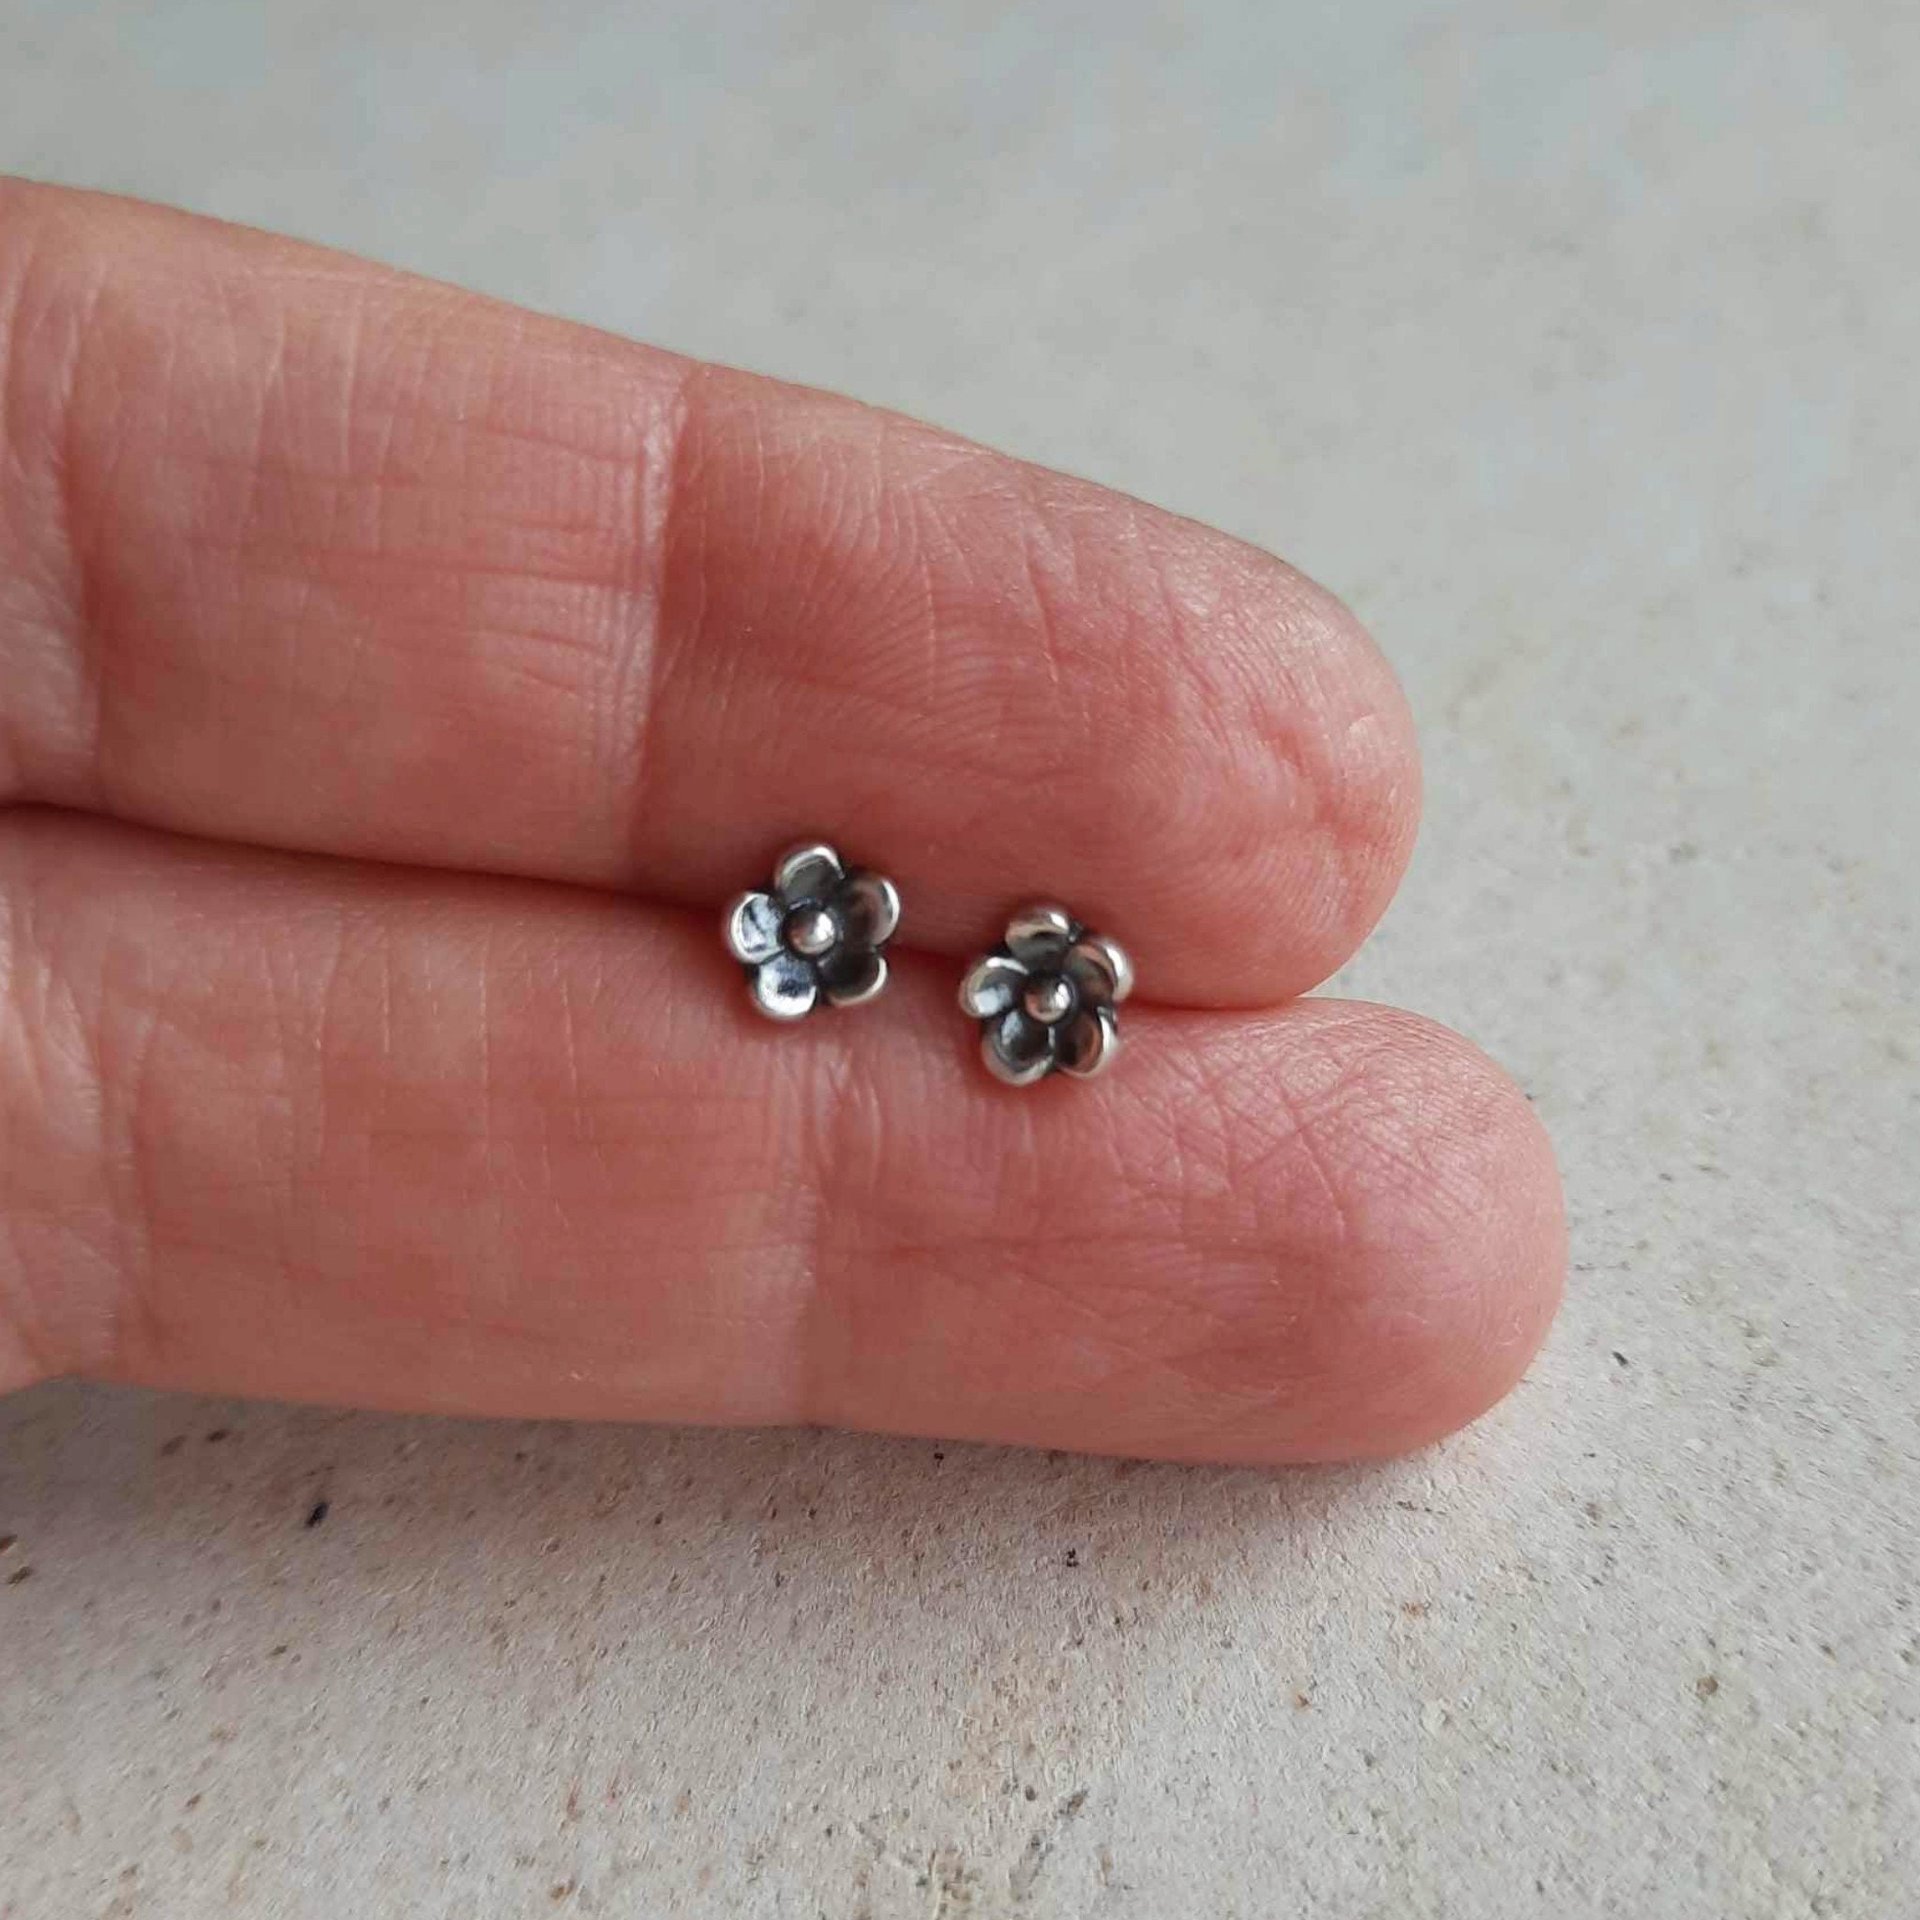 Small forget me not flower studs, hand made by The Tiny Tree Frog Jewellery